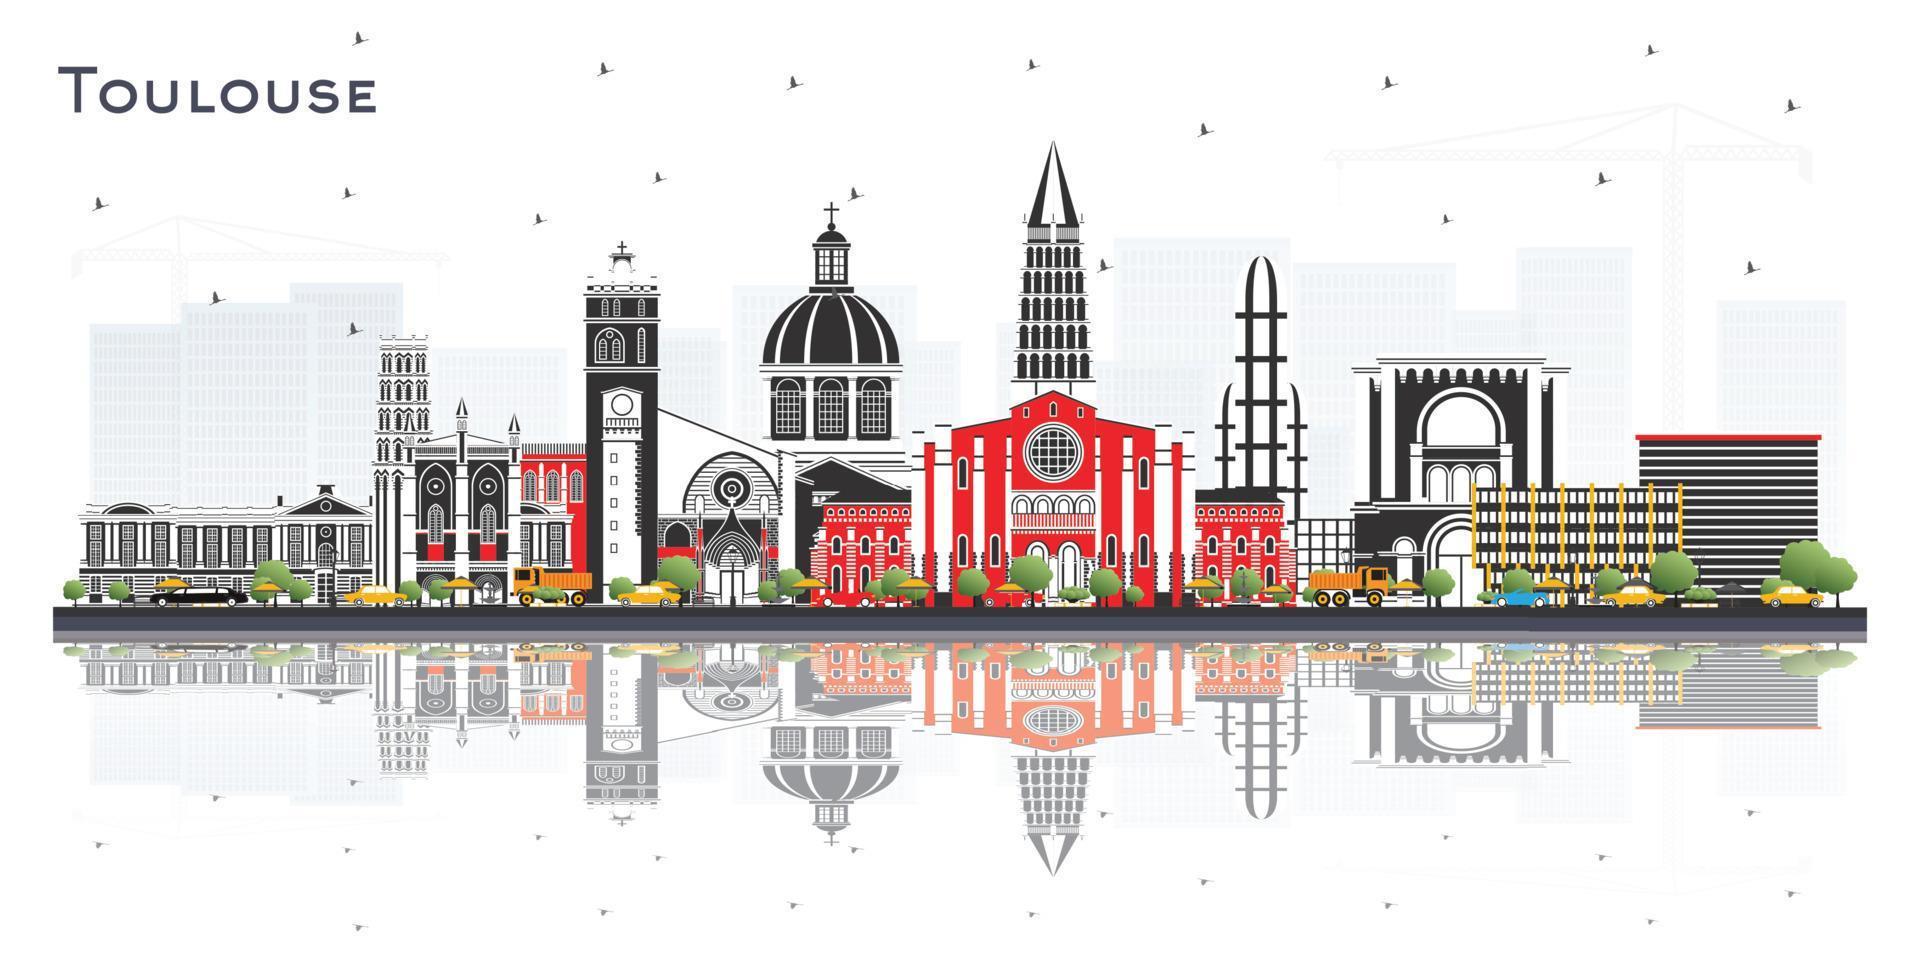 Toulouse France City Skyline with Color Buildings and Reflections Isolated on White. Vector Illustration. Toulouse Cityscape with Landmarks.